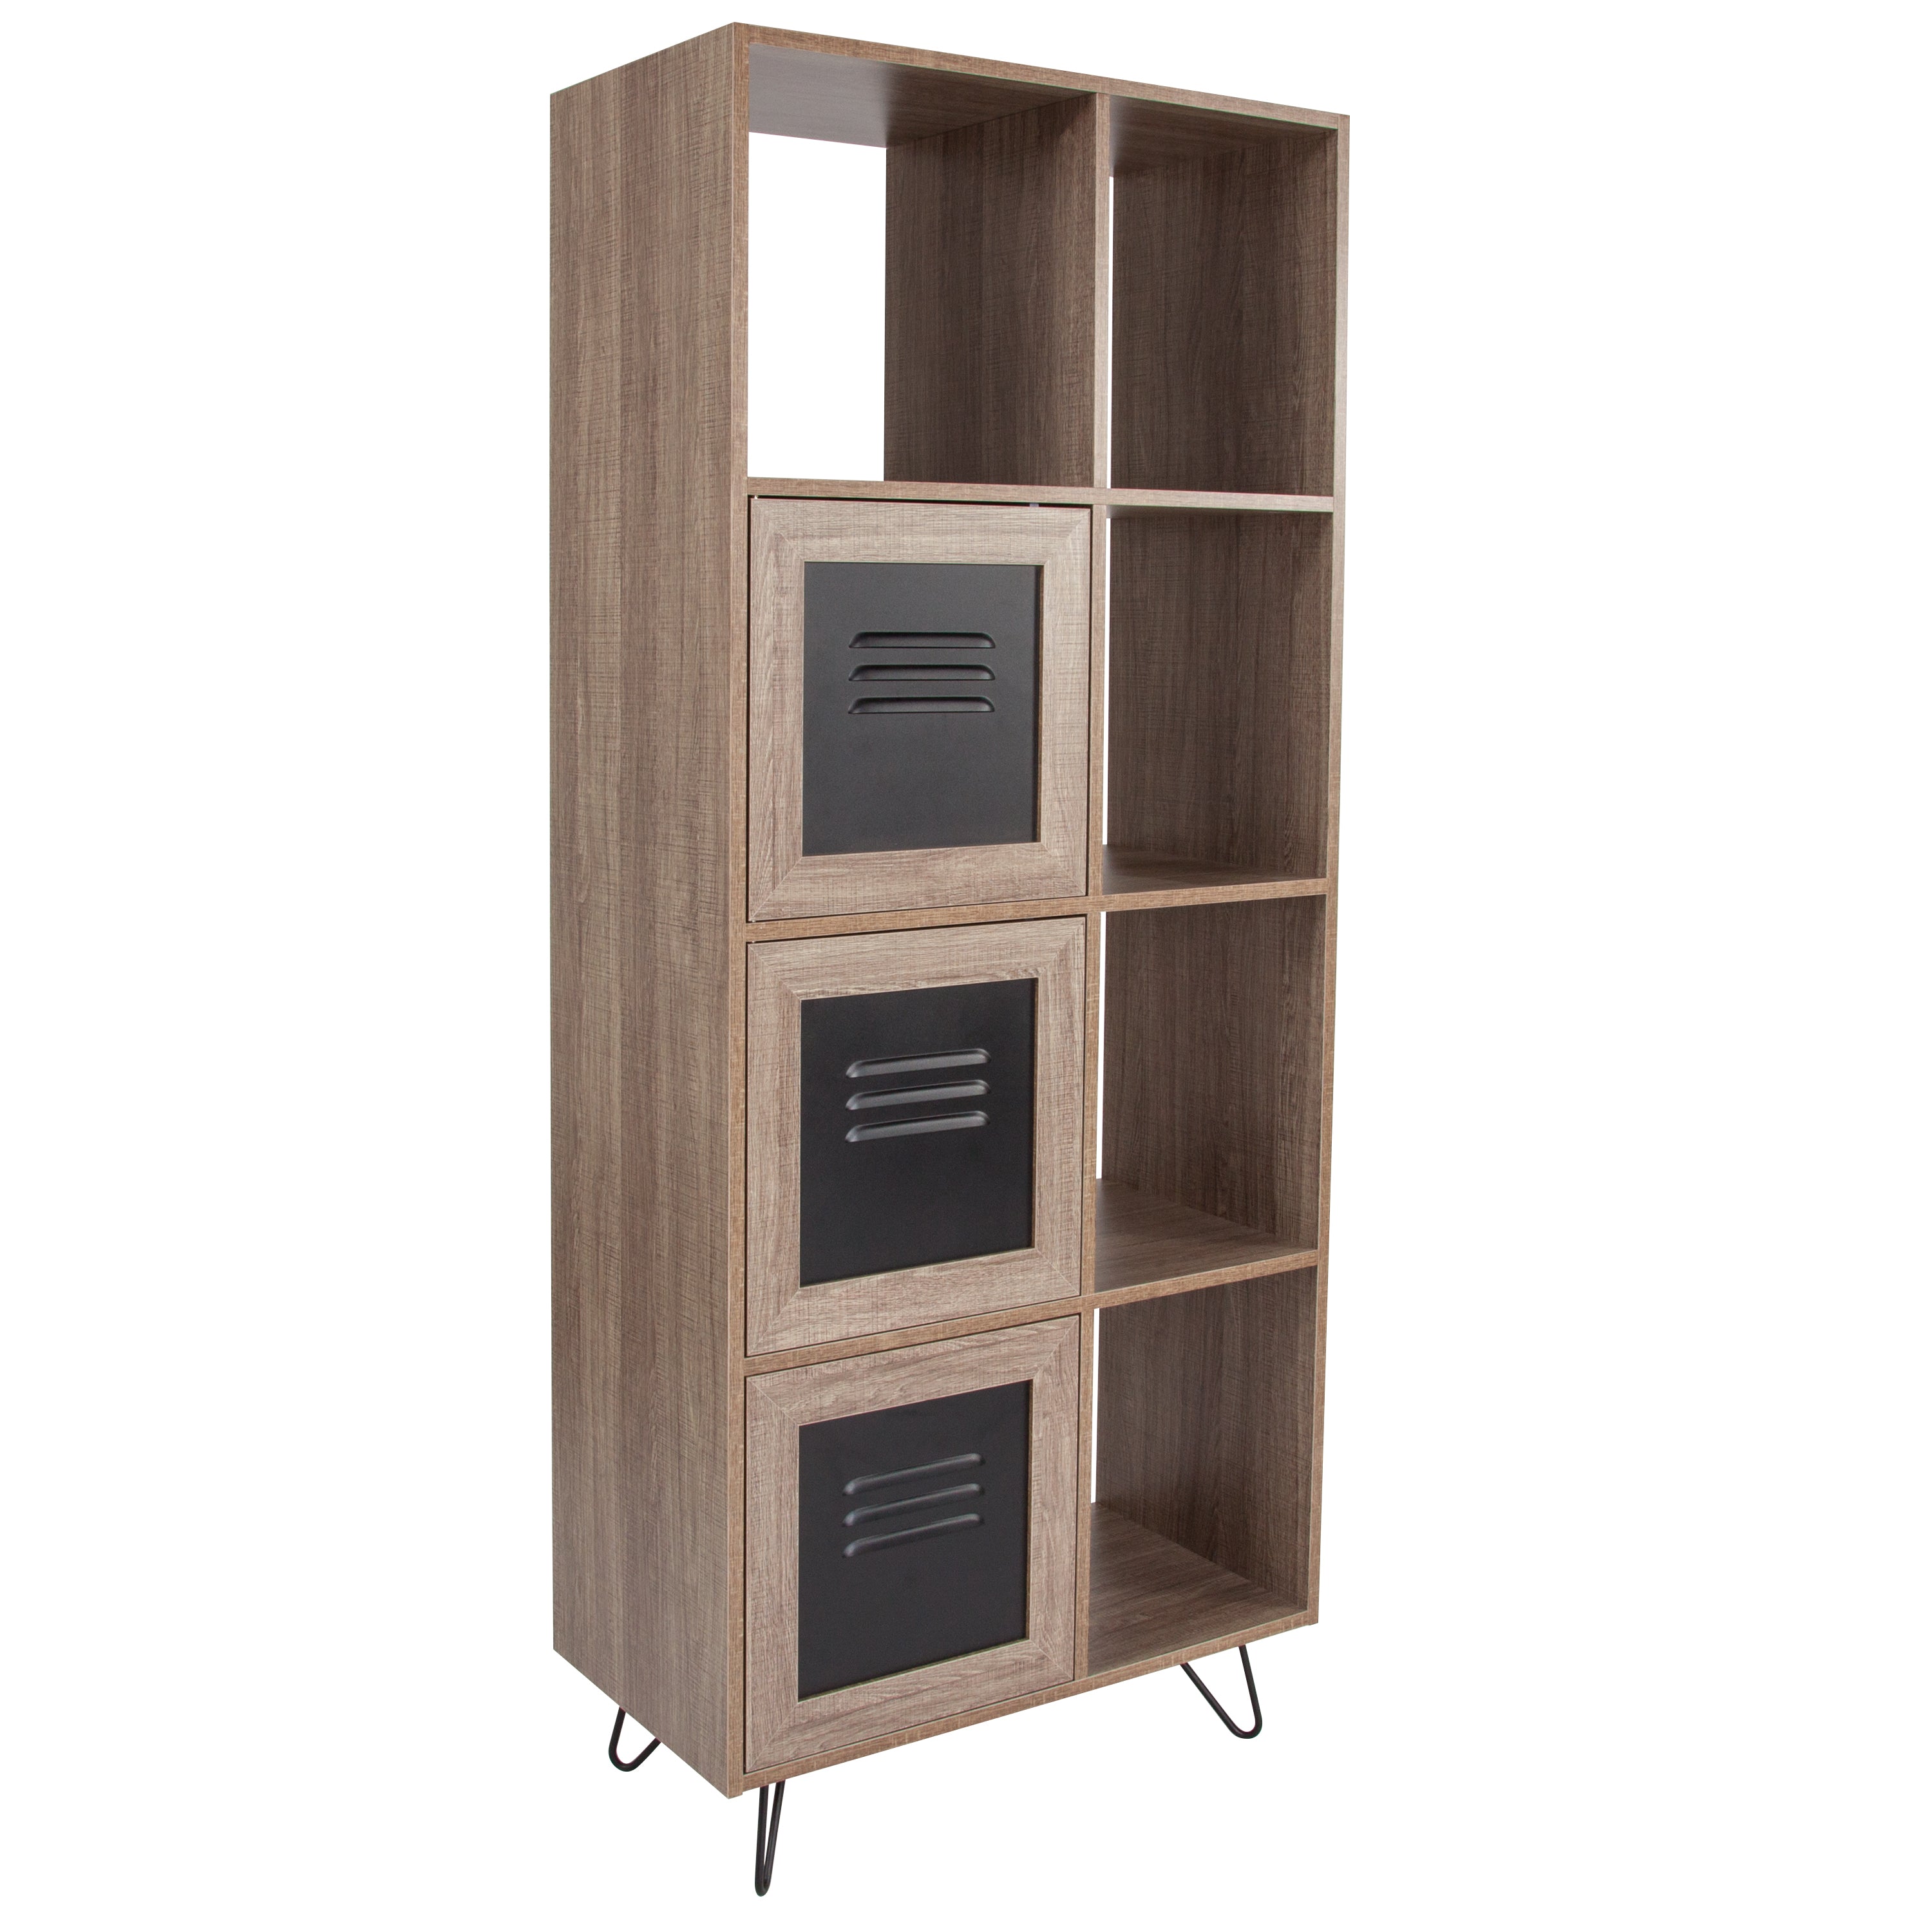 Woodridge Collection 63"H 5 Cube Storage Organizer Bookcase with Metal Cabinet Doors-Bookcase-Flash Furniture-Wall2Wall Furnishings